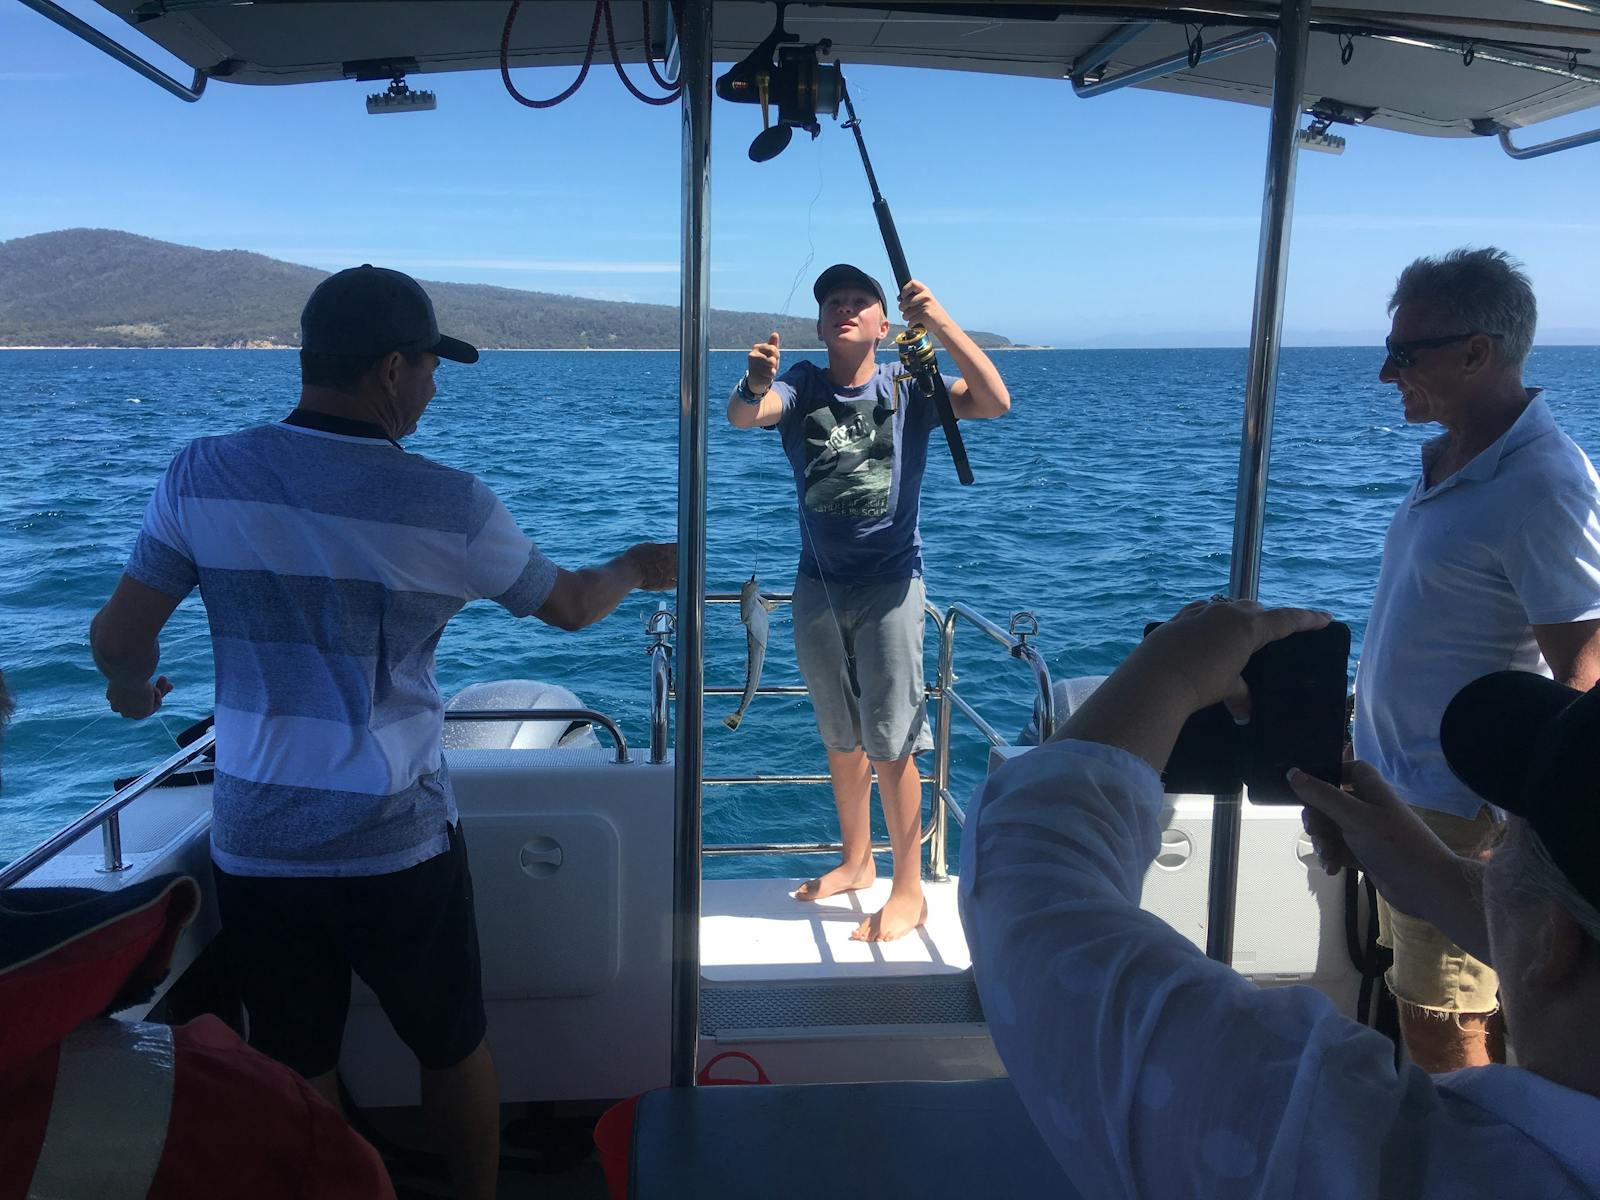 Shows guests with fishing rods, catching a fish from the back of the vessel